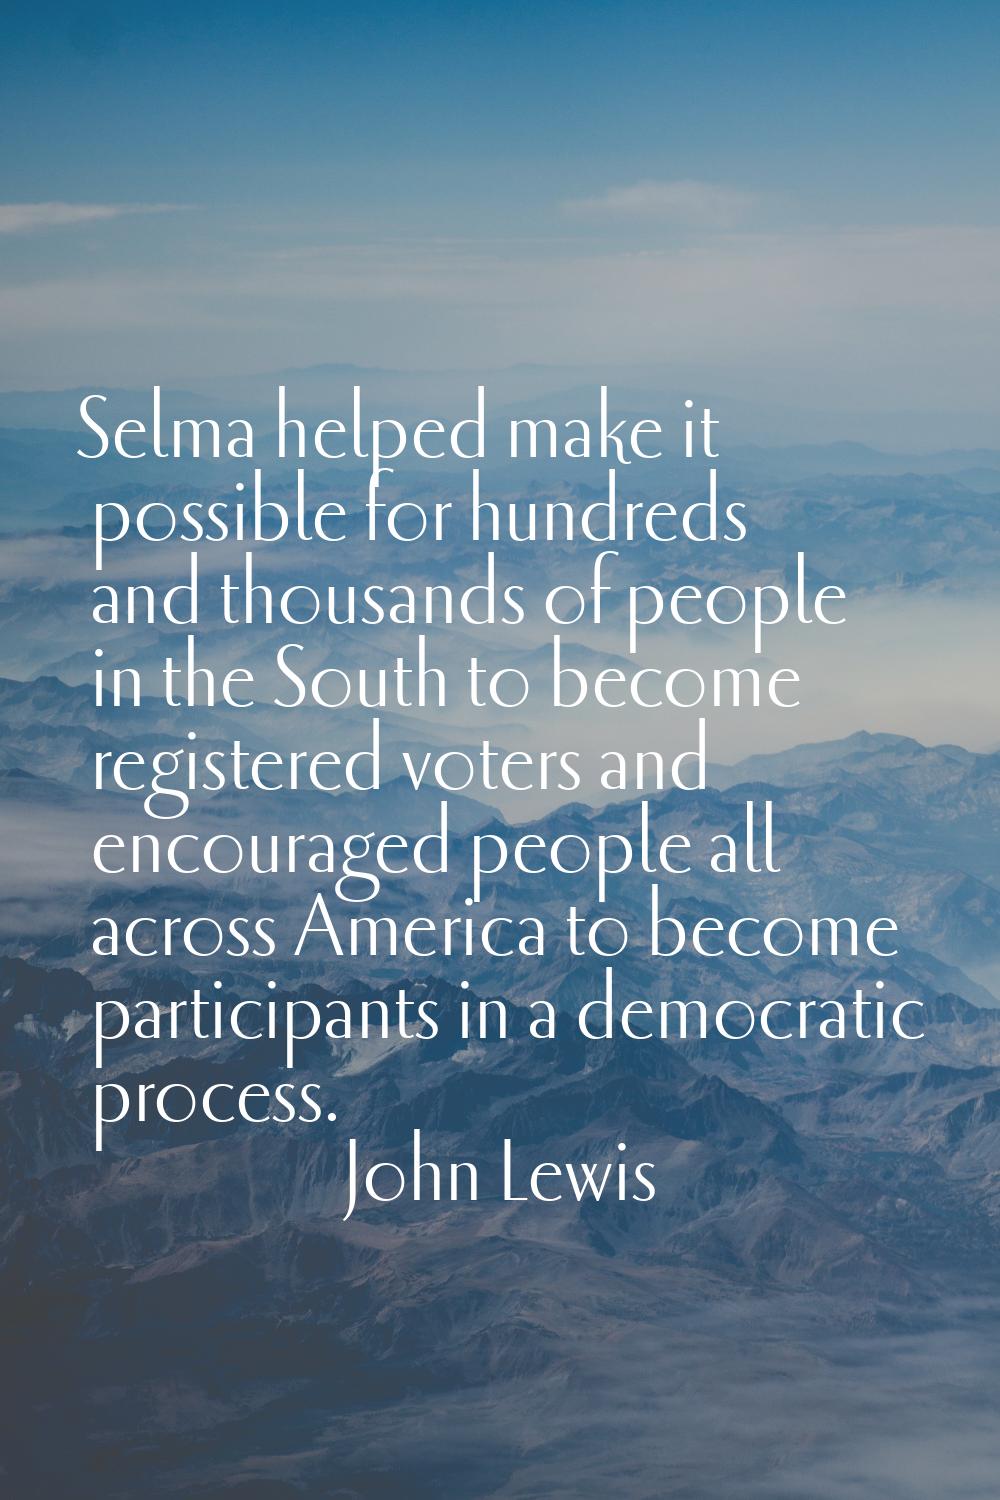 Selma helped make it possible for hundreds and thousands of people in the South to become registere